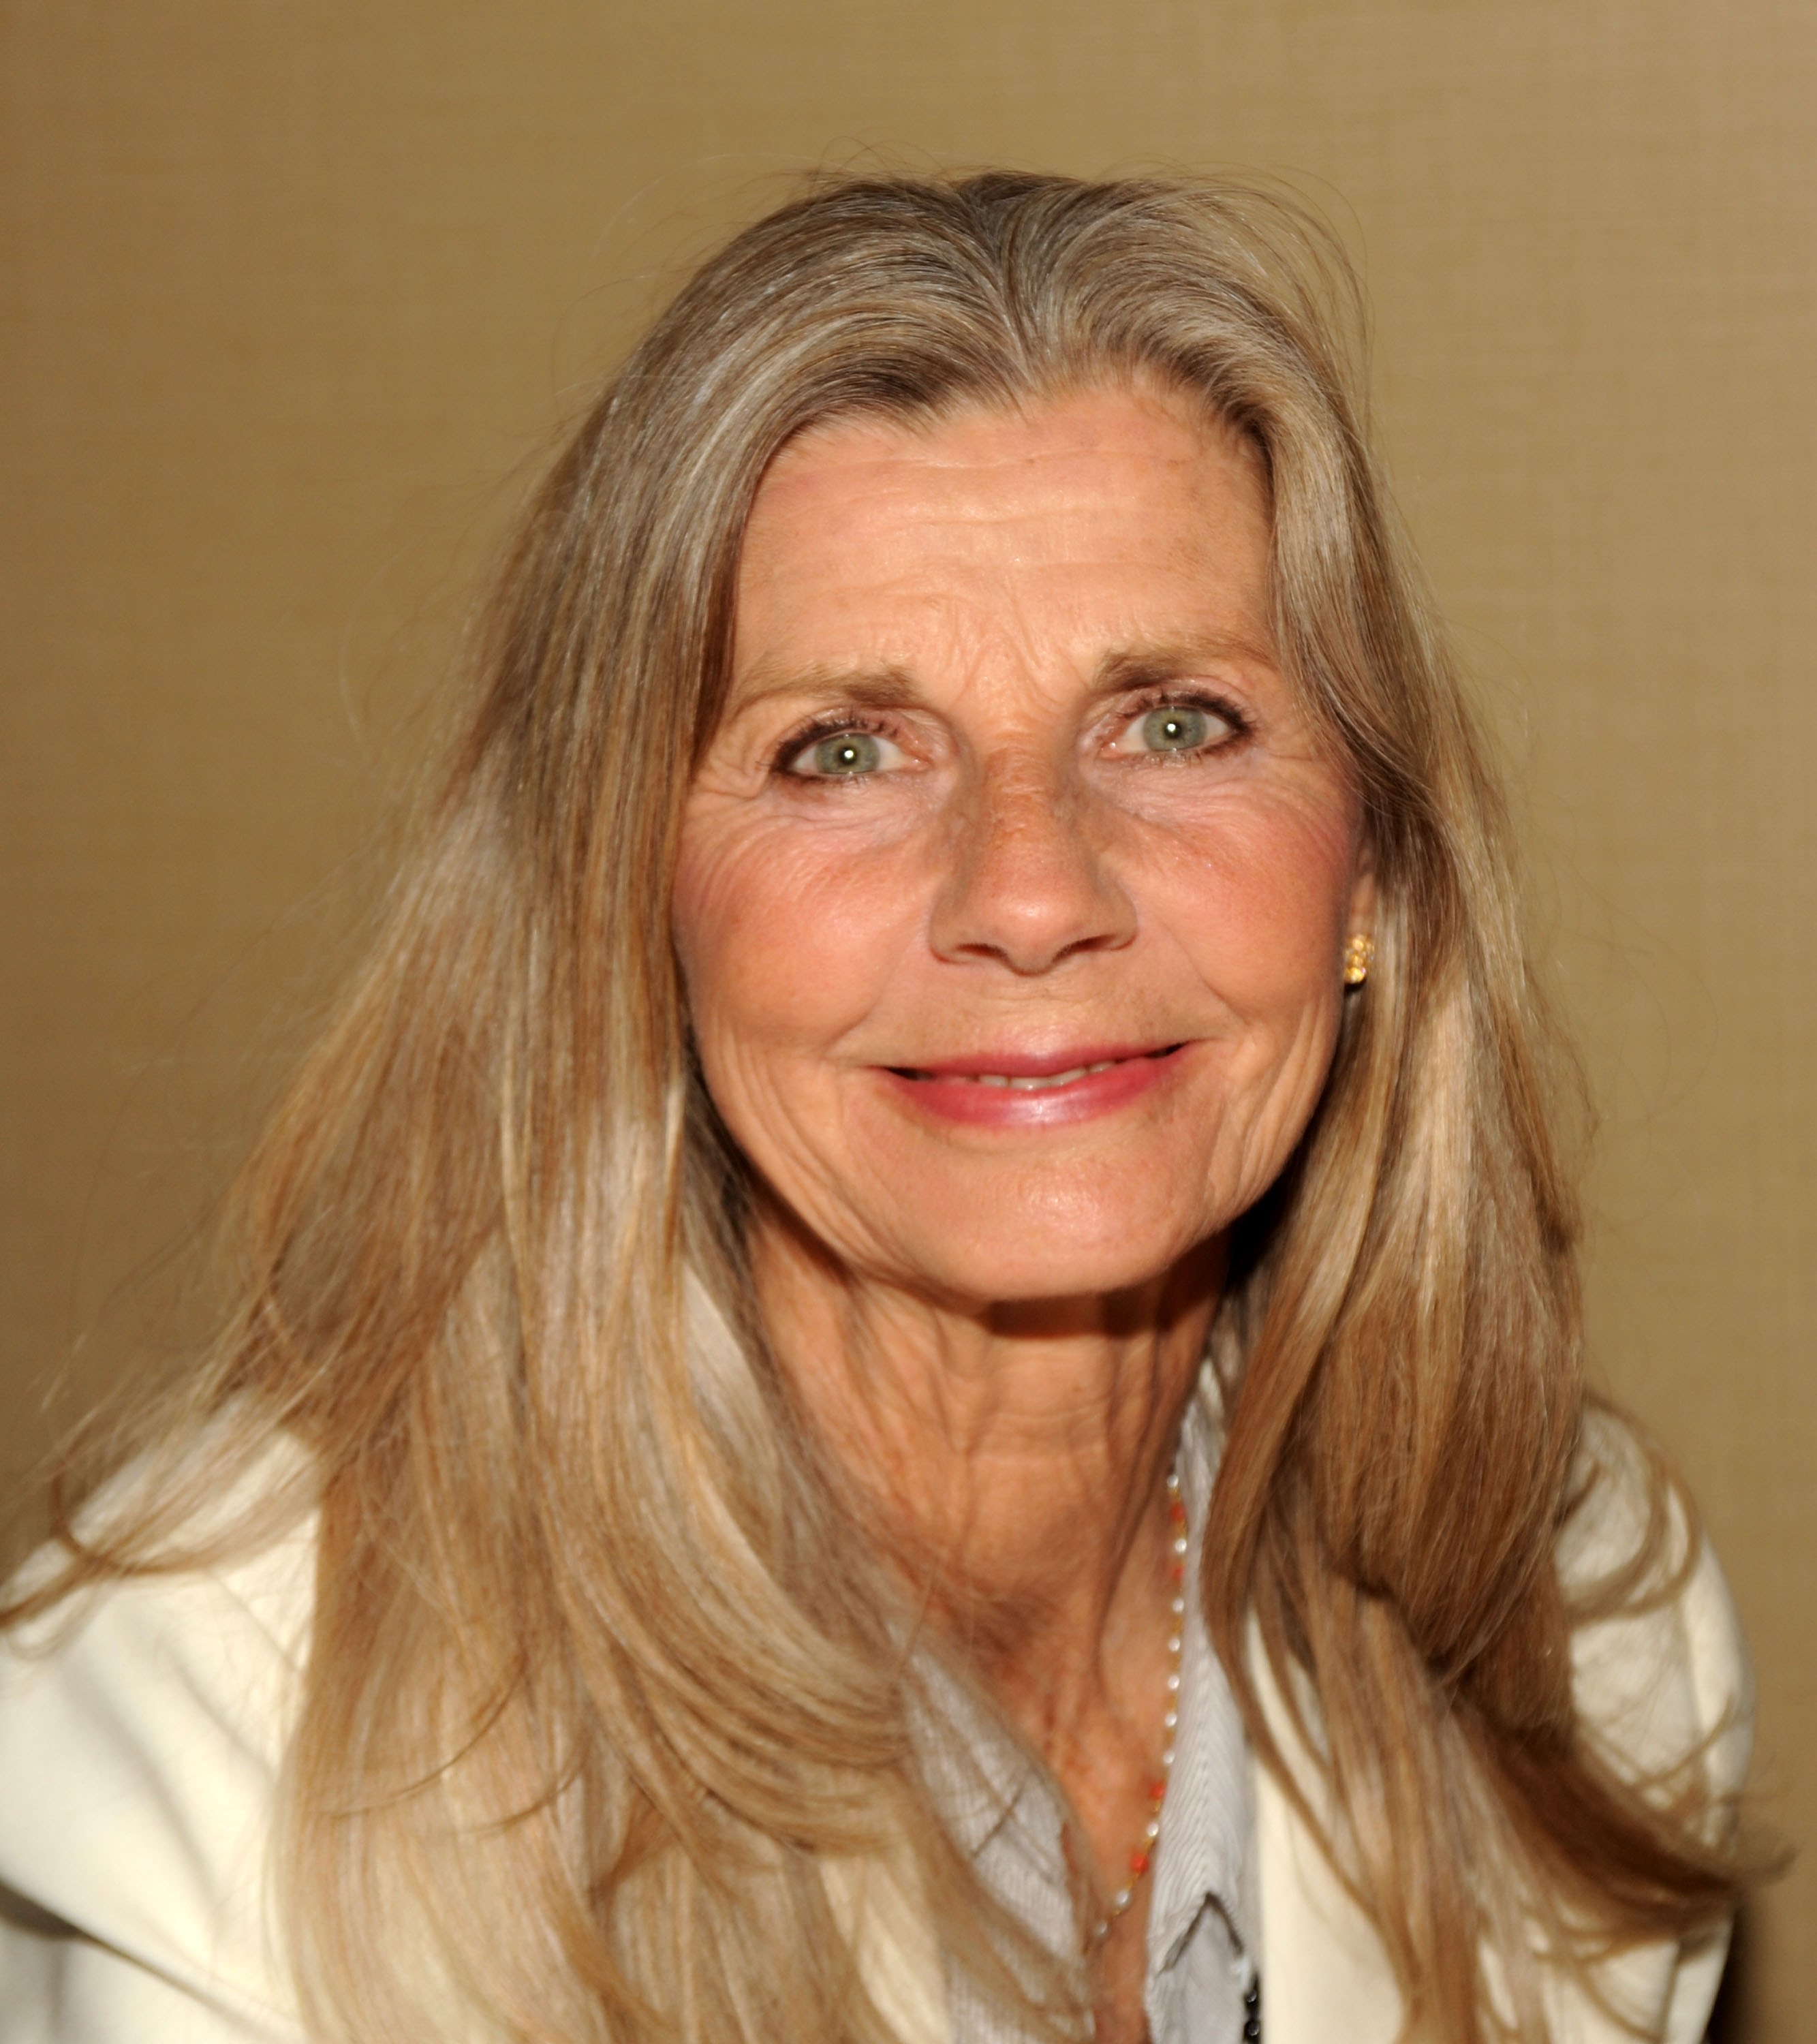 Jan Smithers attends the 2014 Chiller Theatre Expo at the Sheraton Parsippany Hotel on April 25, 2014 in Parsippany, New Jersey | Source: Getty Images